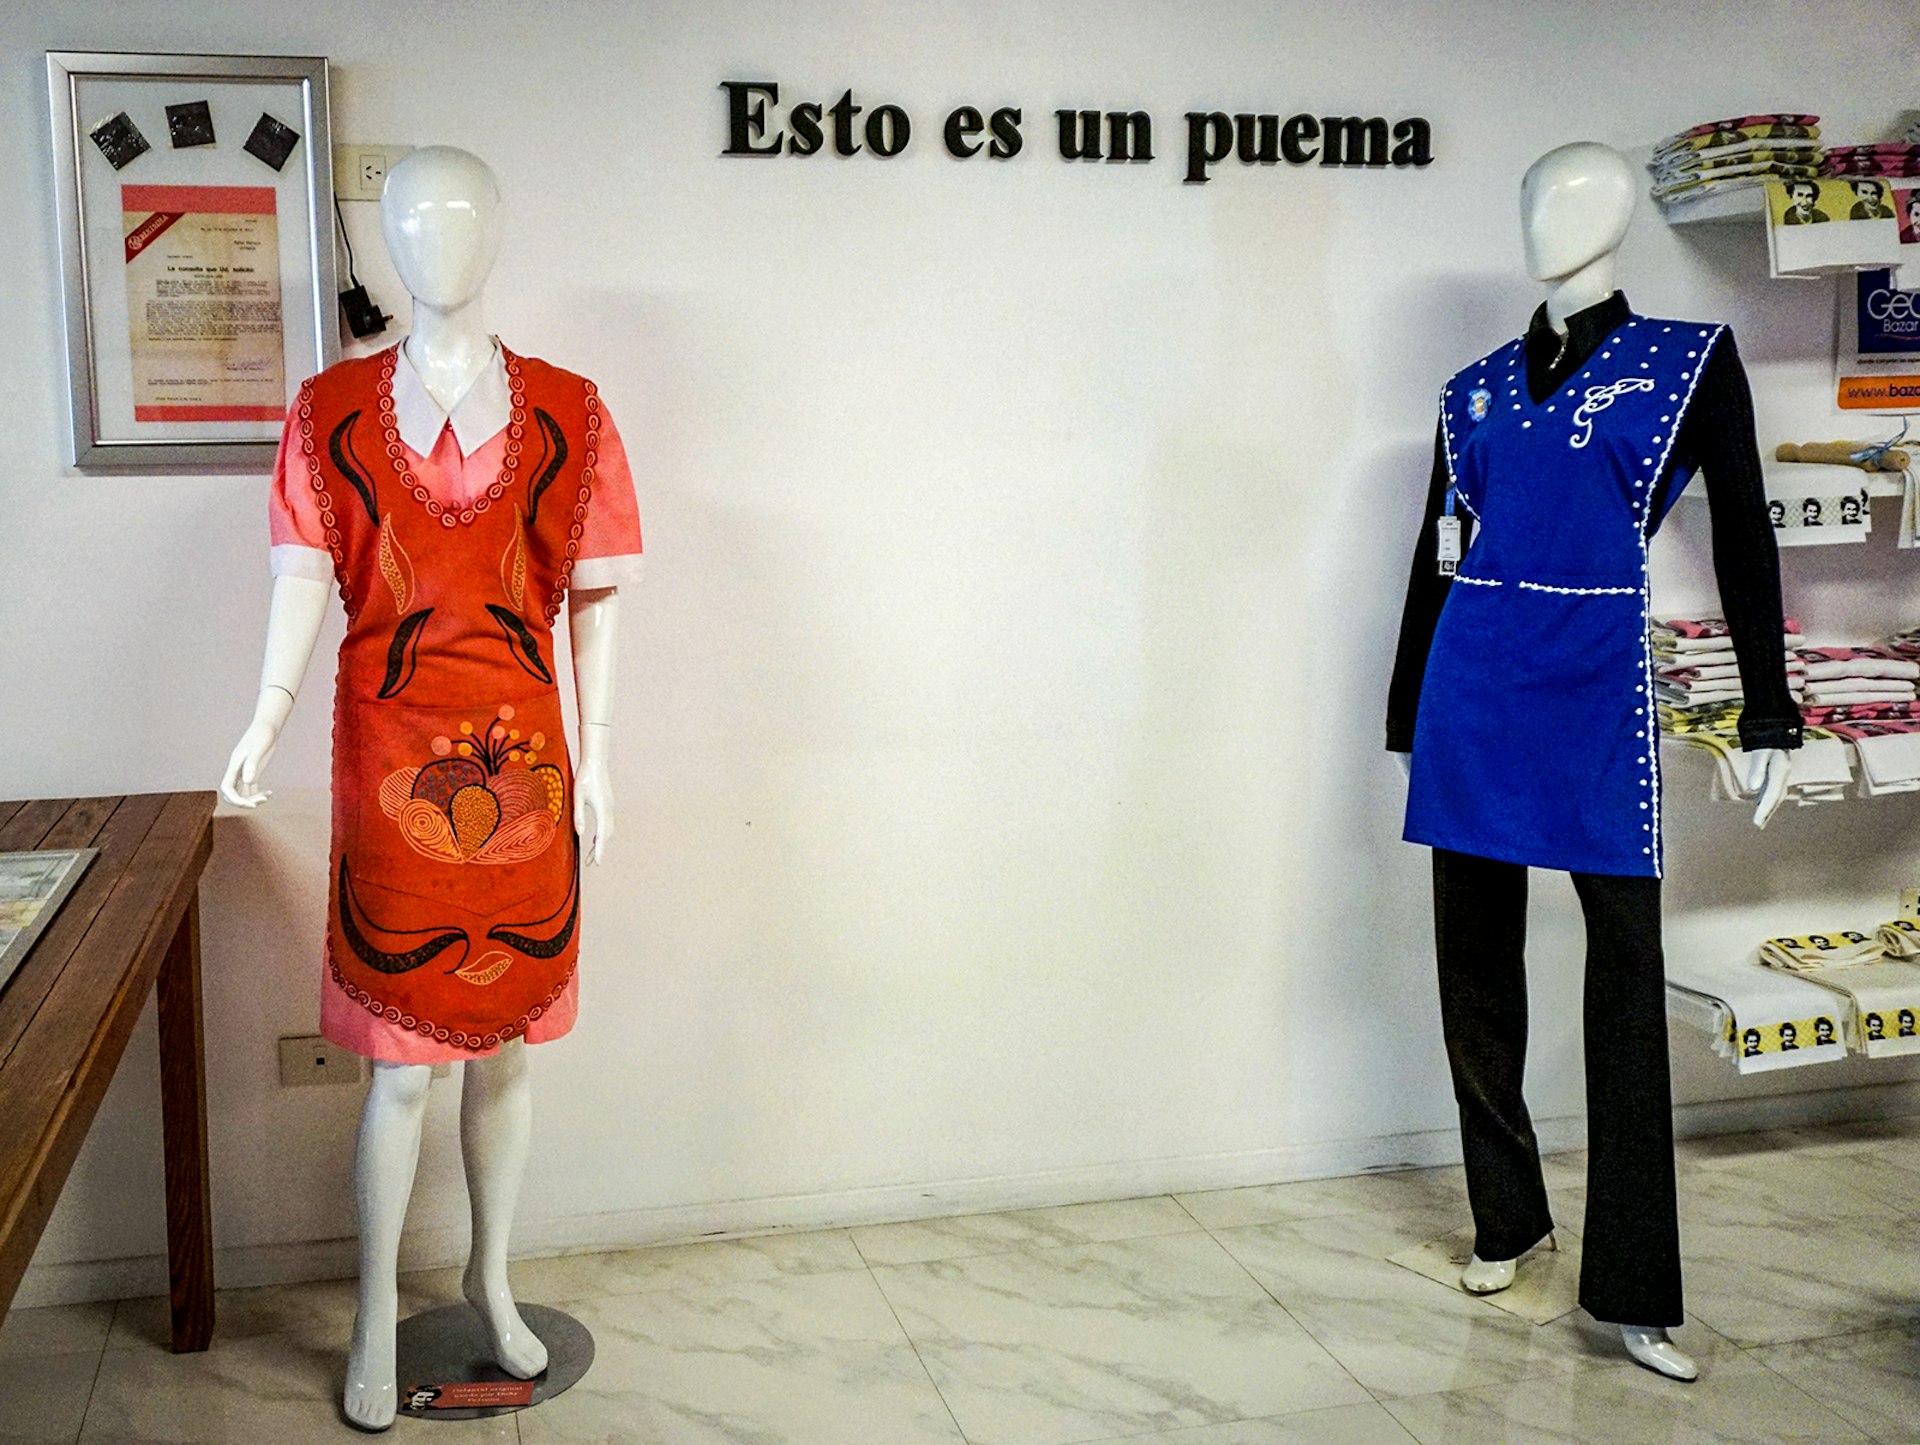 Two mannequins wearing a blue and orange apron, standing against a white wall with "Esto es un puema" written on it 